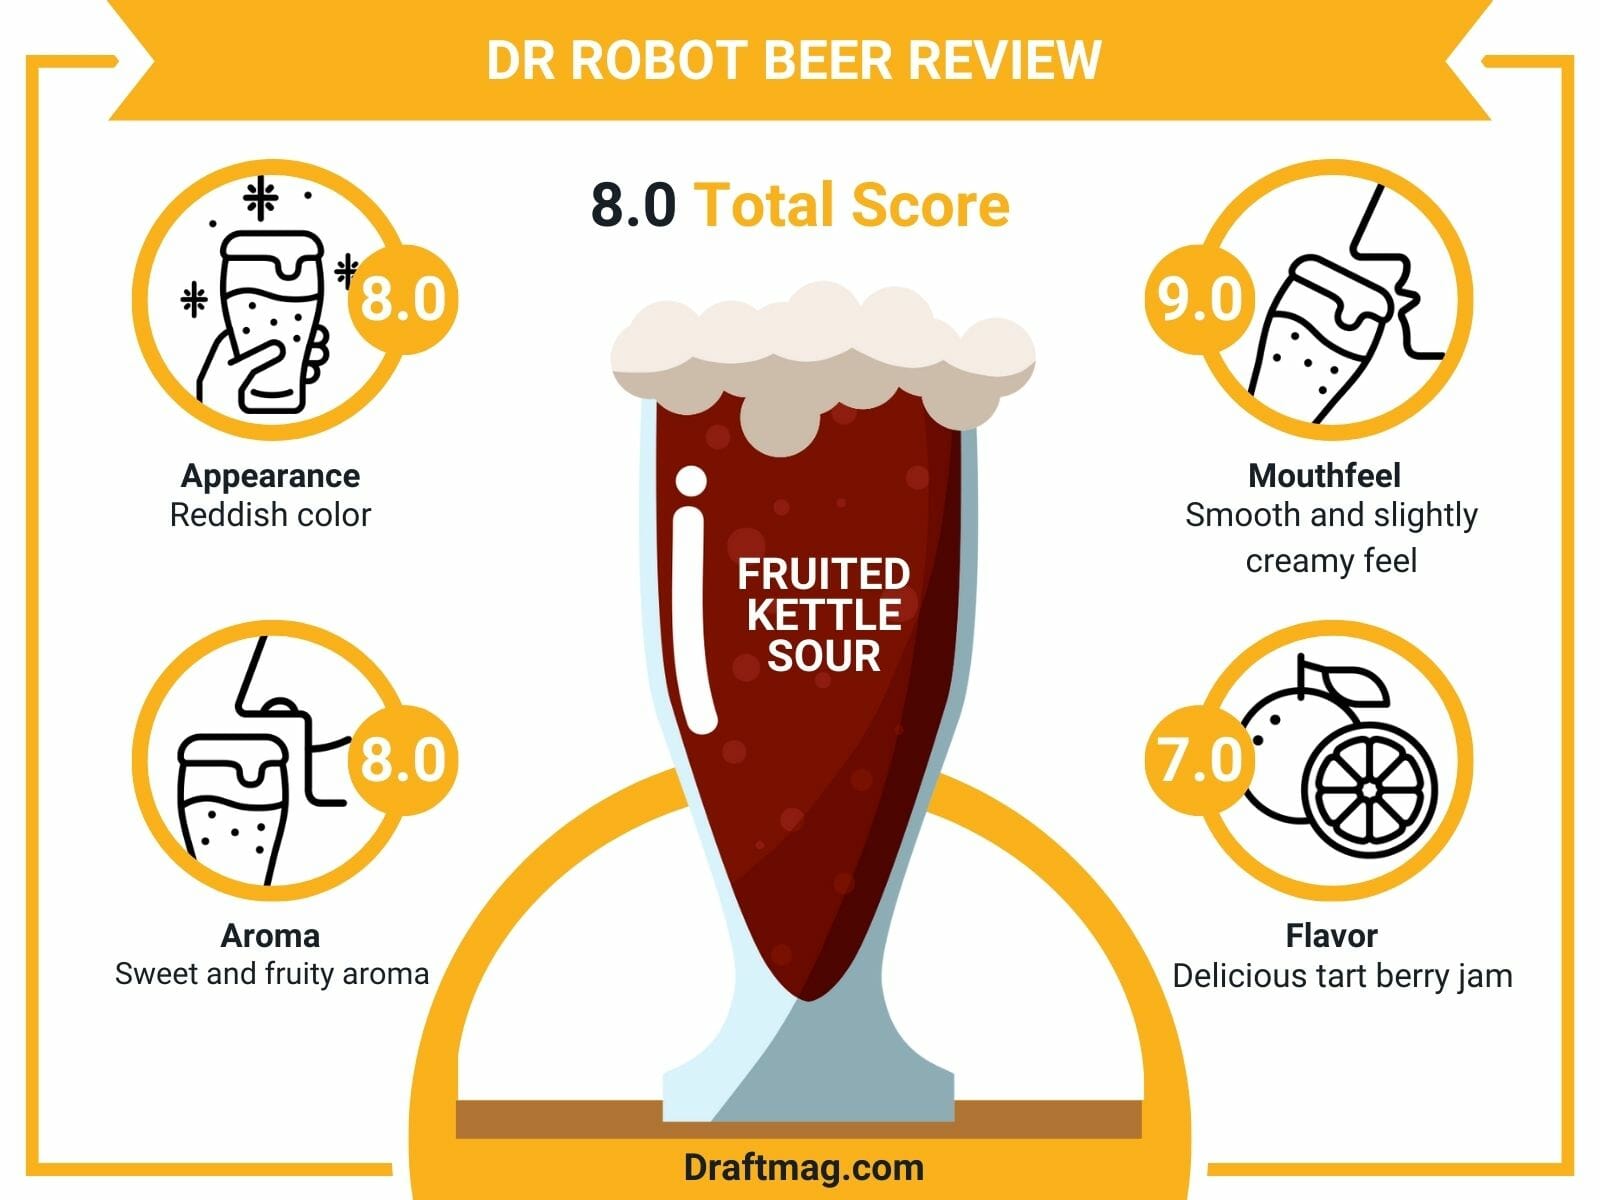 Dr Robot Beer Review Infographic